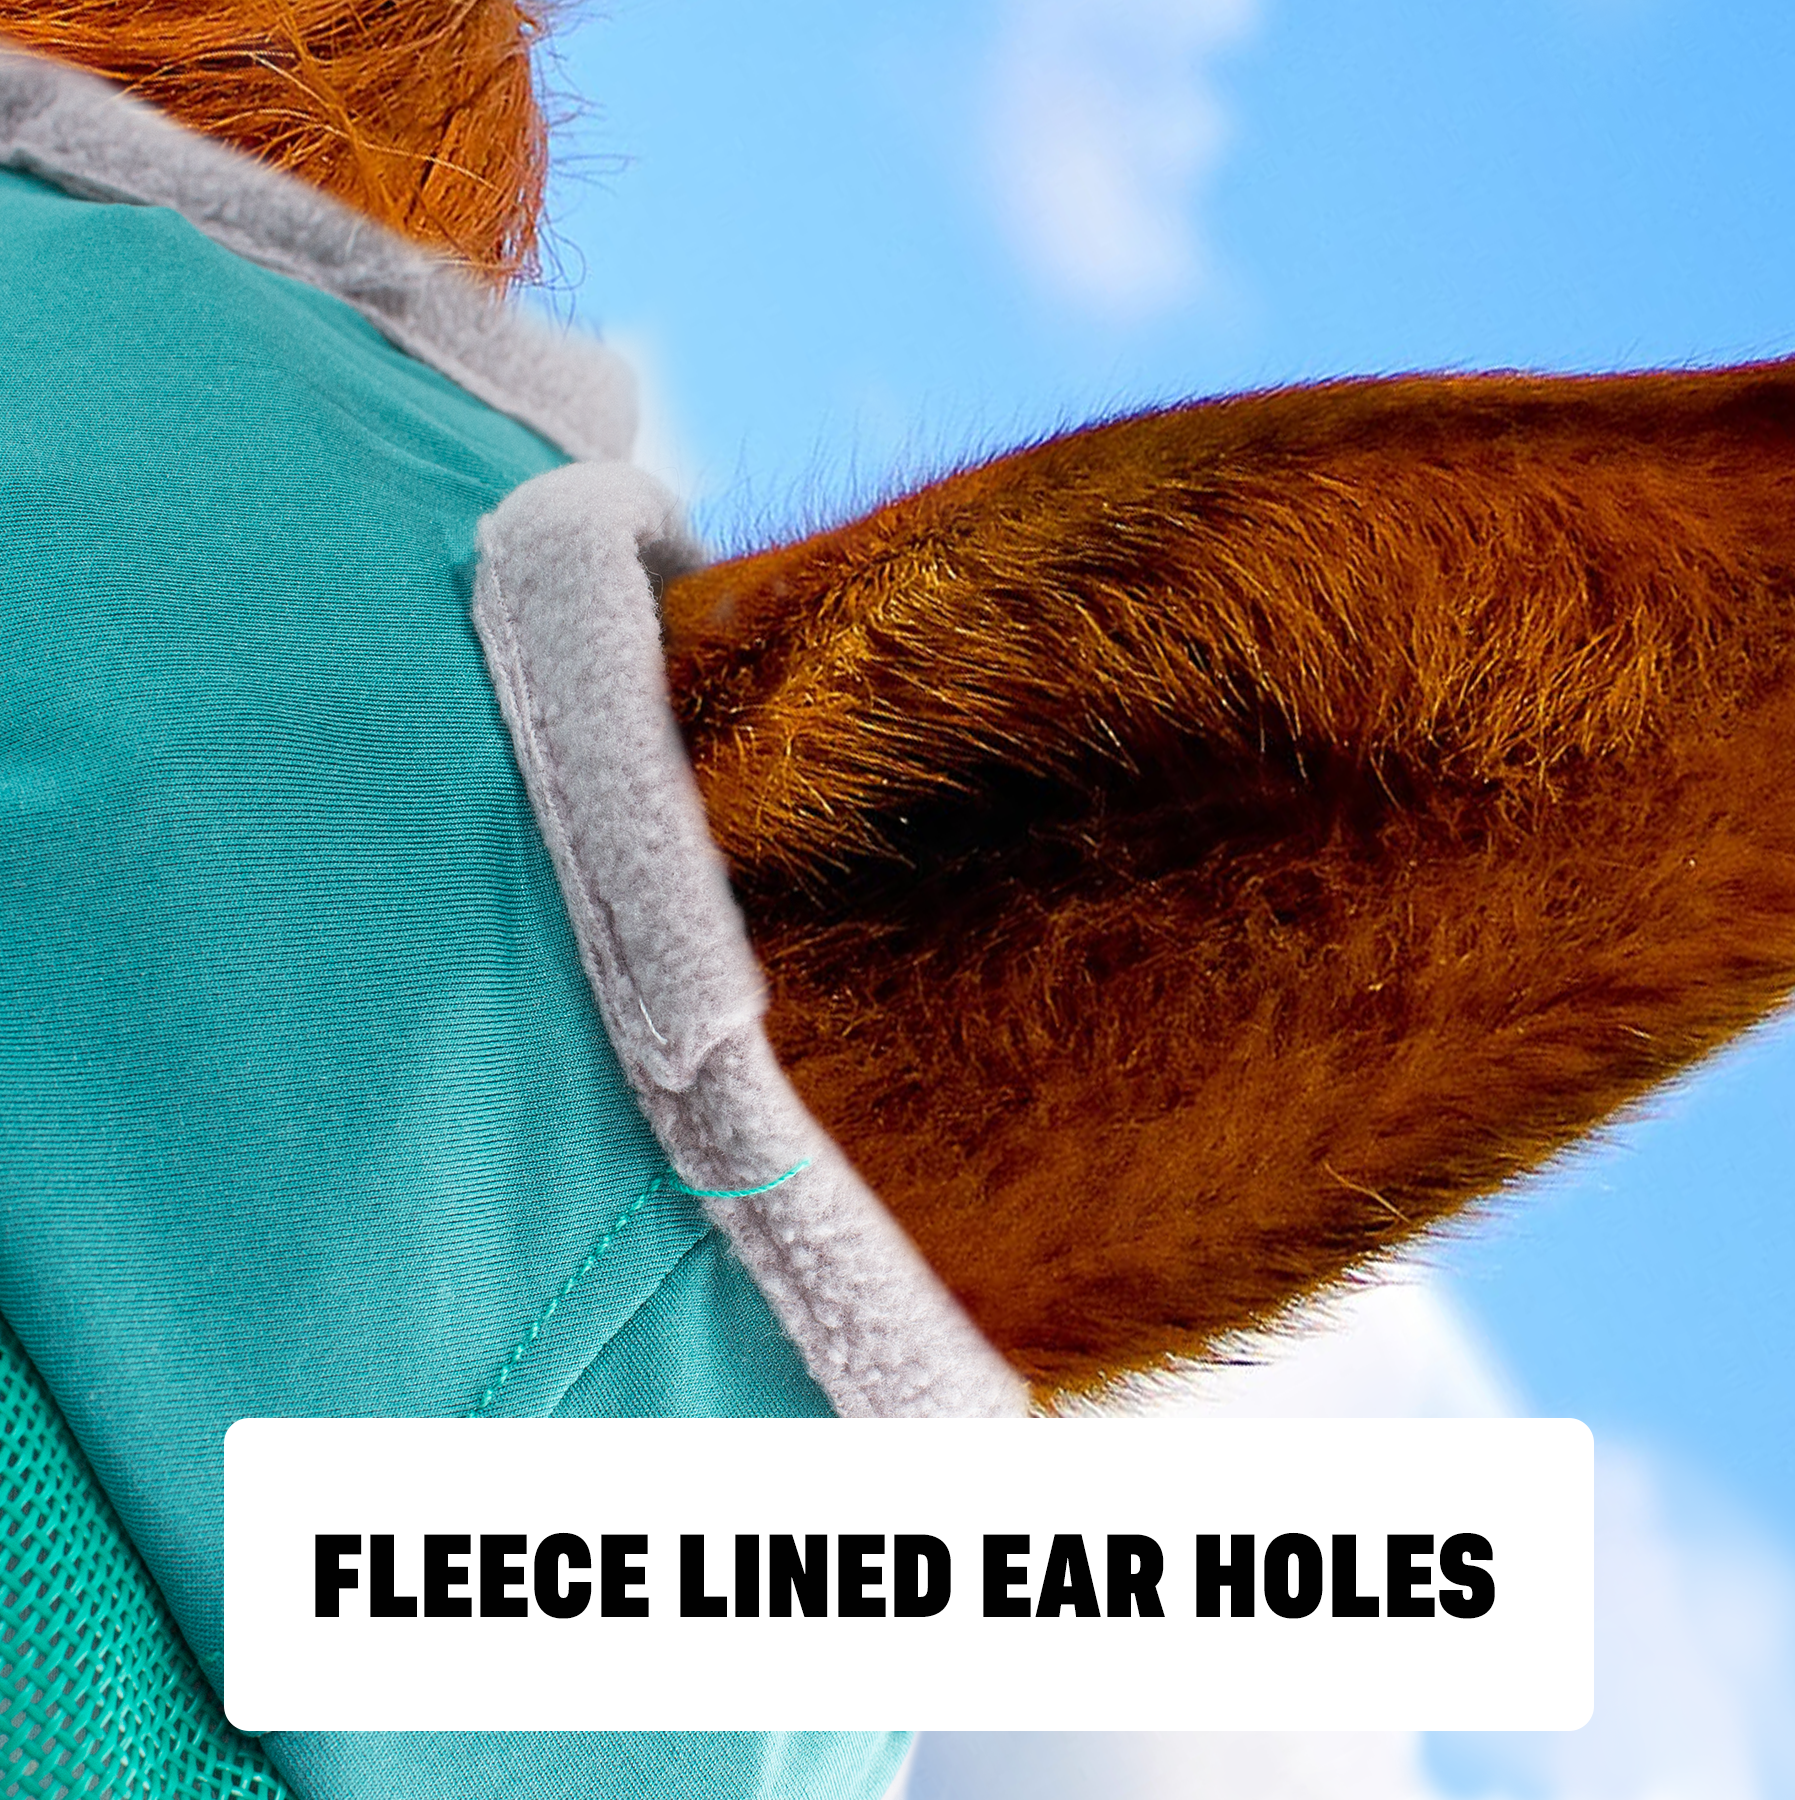 Fly Mask For a Horse with Ears or with Nose - Multi-Size Options